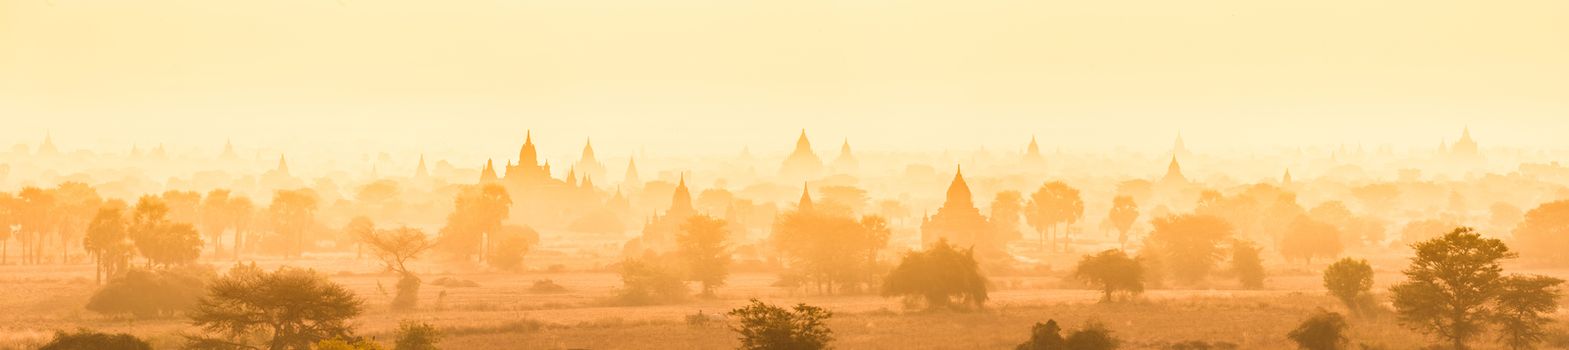 Temples of Bagan an ancient city located in the Mandalay Region of Burma, Myanmar, Asia. yellow toned. Thumbnail format. Vertical panoramic composition.